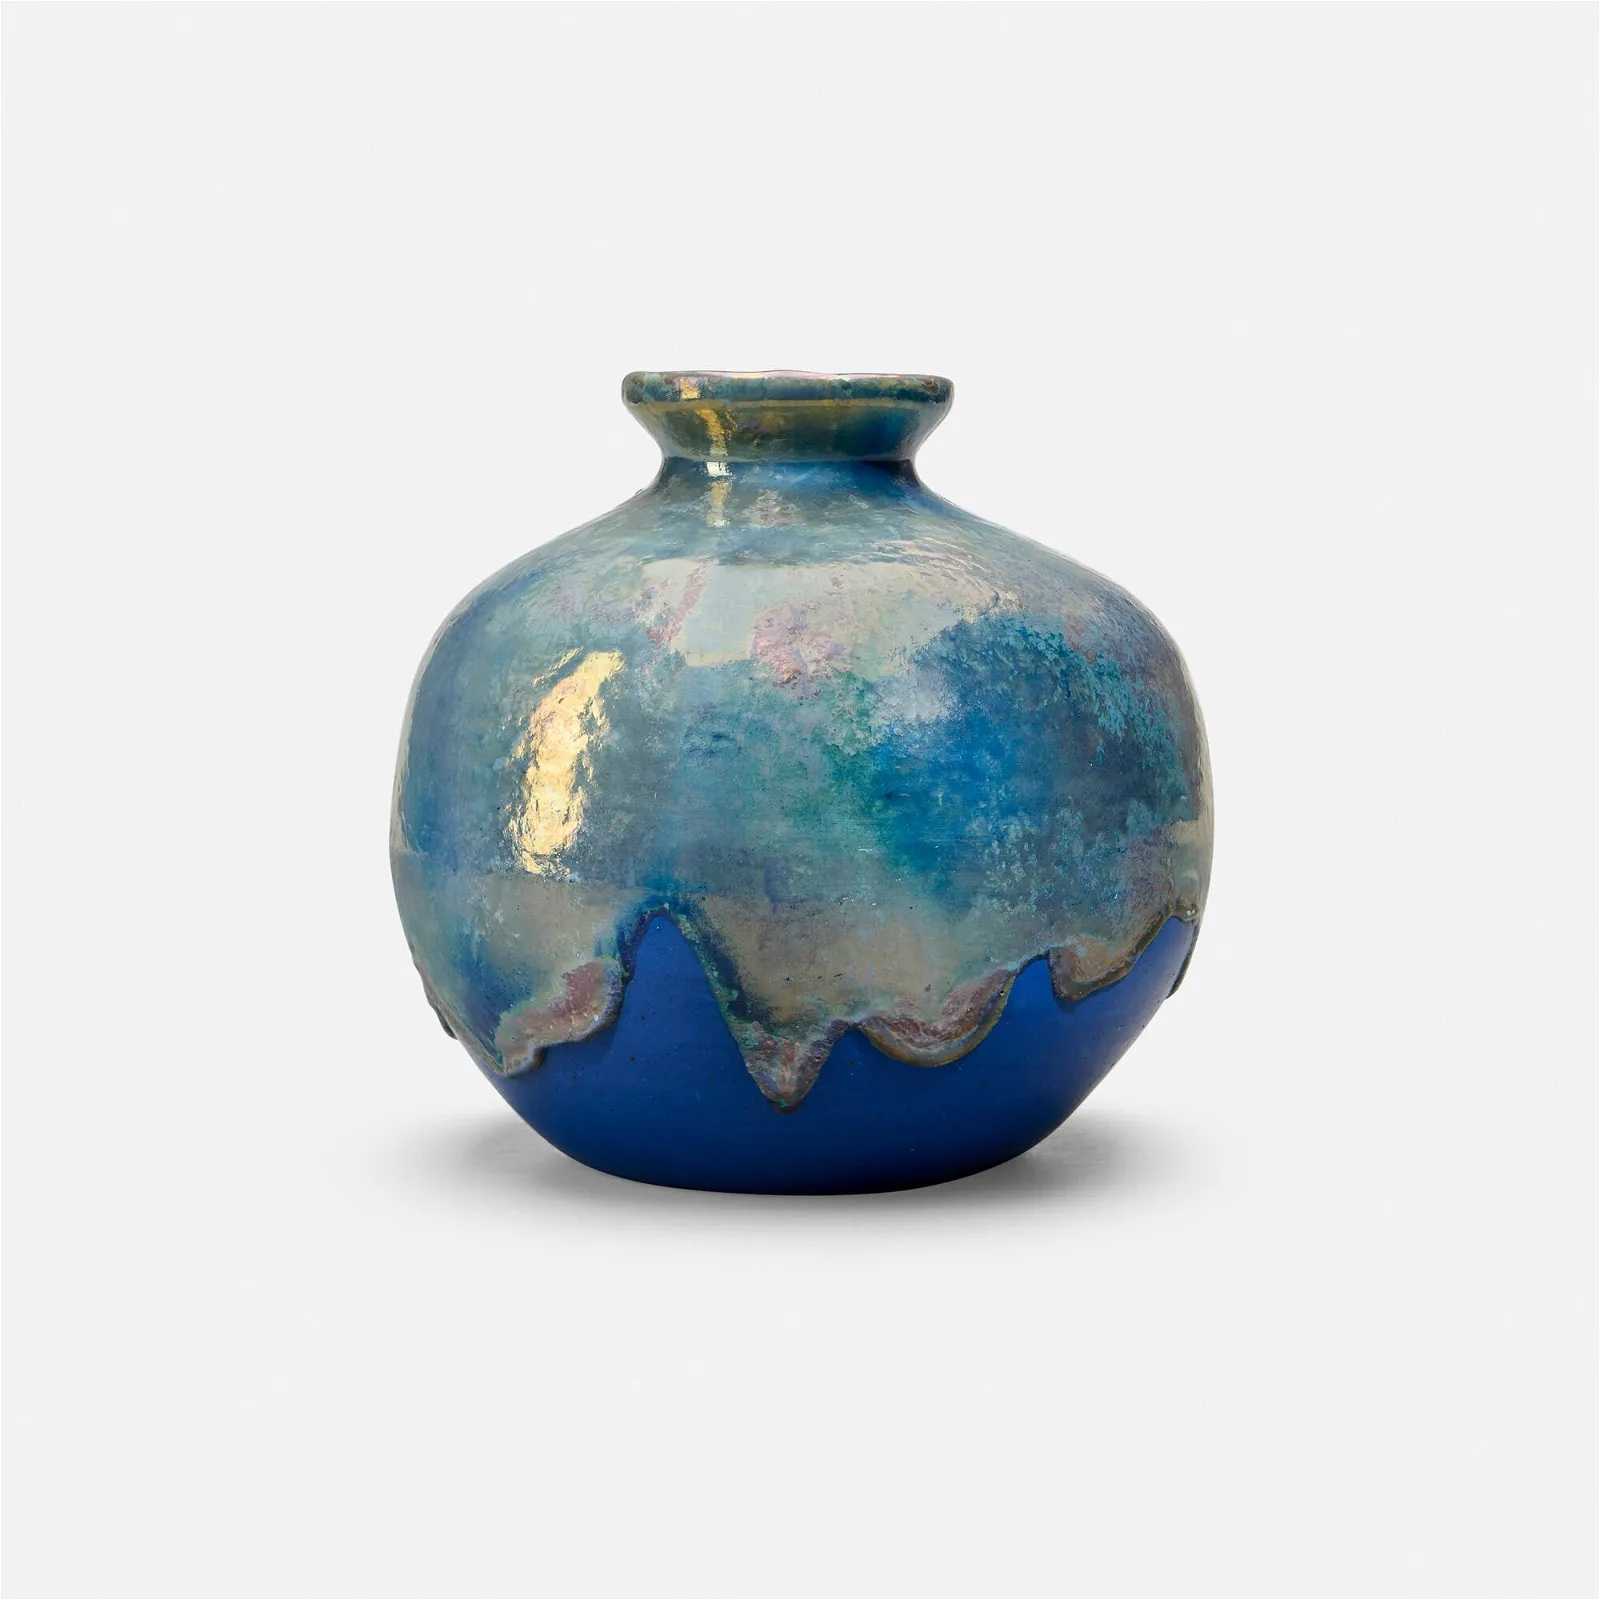 Pewabic Pottery fine vase, which sold for $12,000 ($15,720 with buyer’s premium) at Toomey.